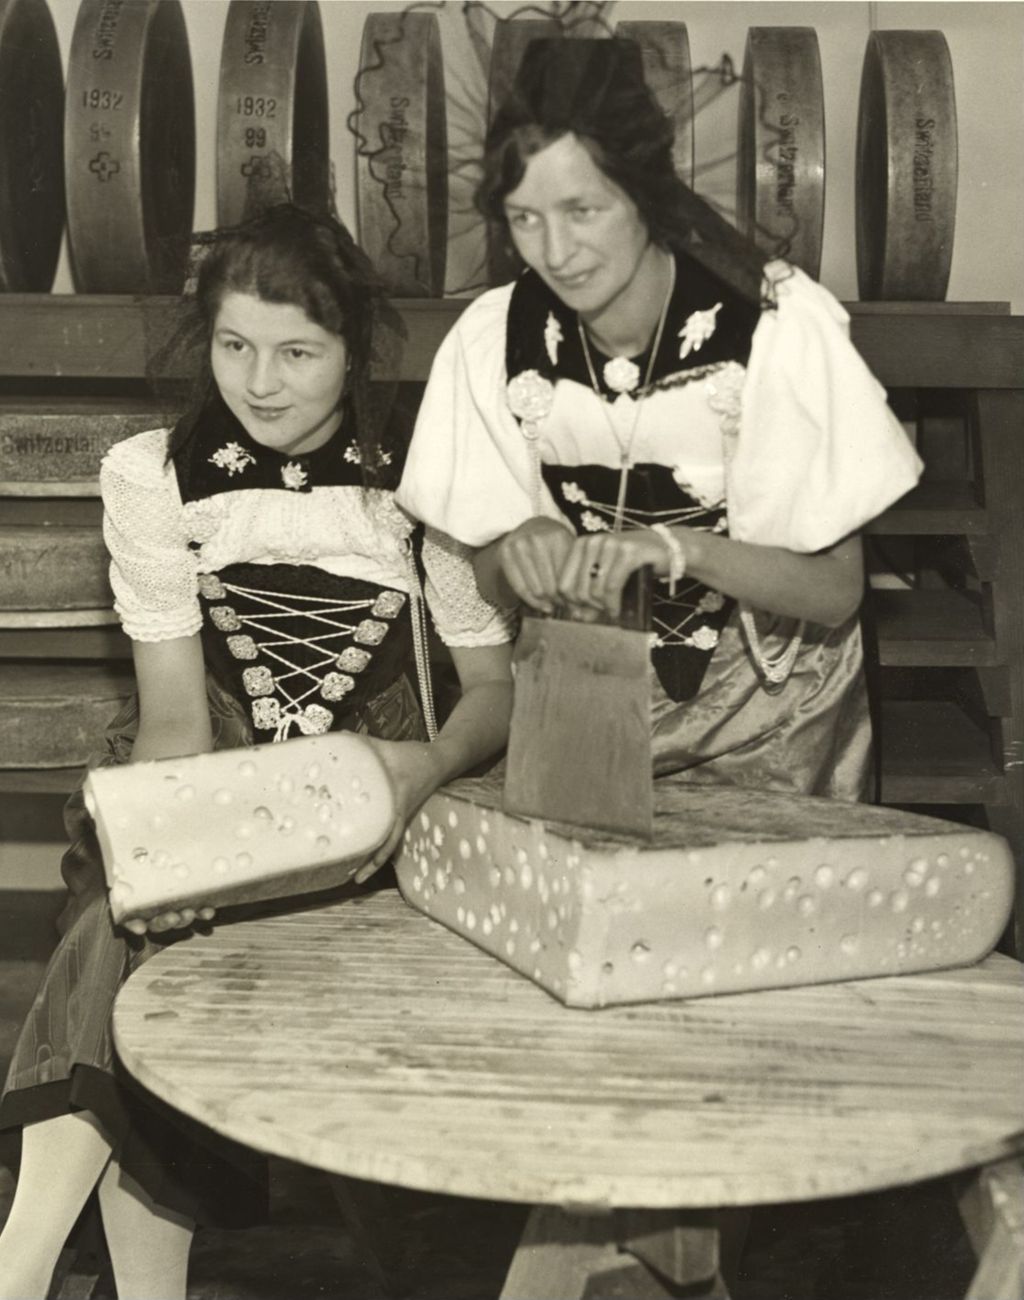 Entertainers at the Swiss Village cutting a piece of Swiss cheese to tempt visitors appetites